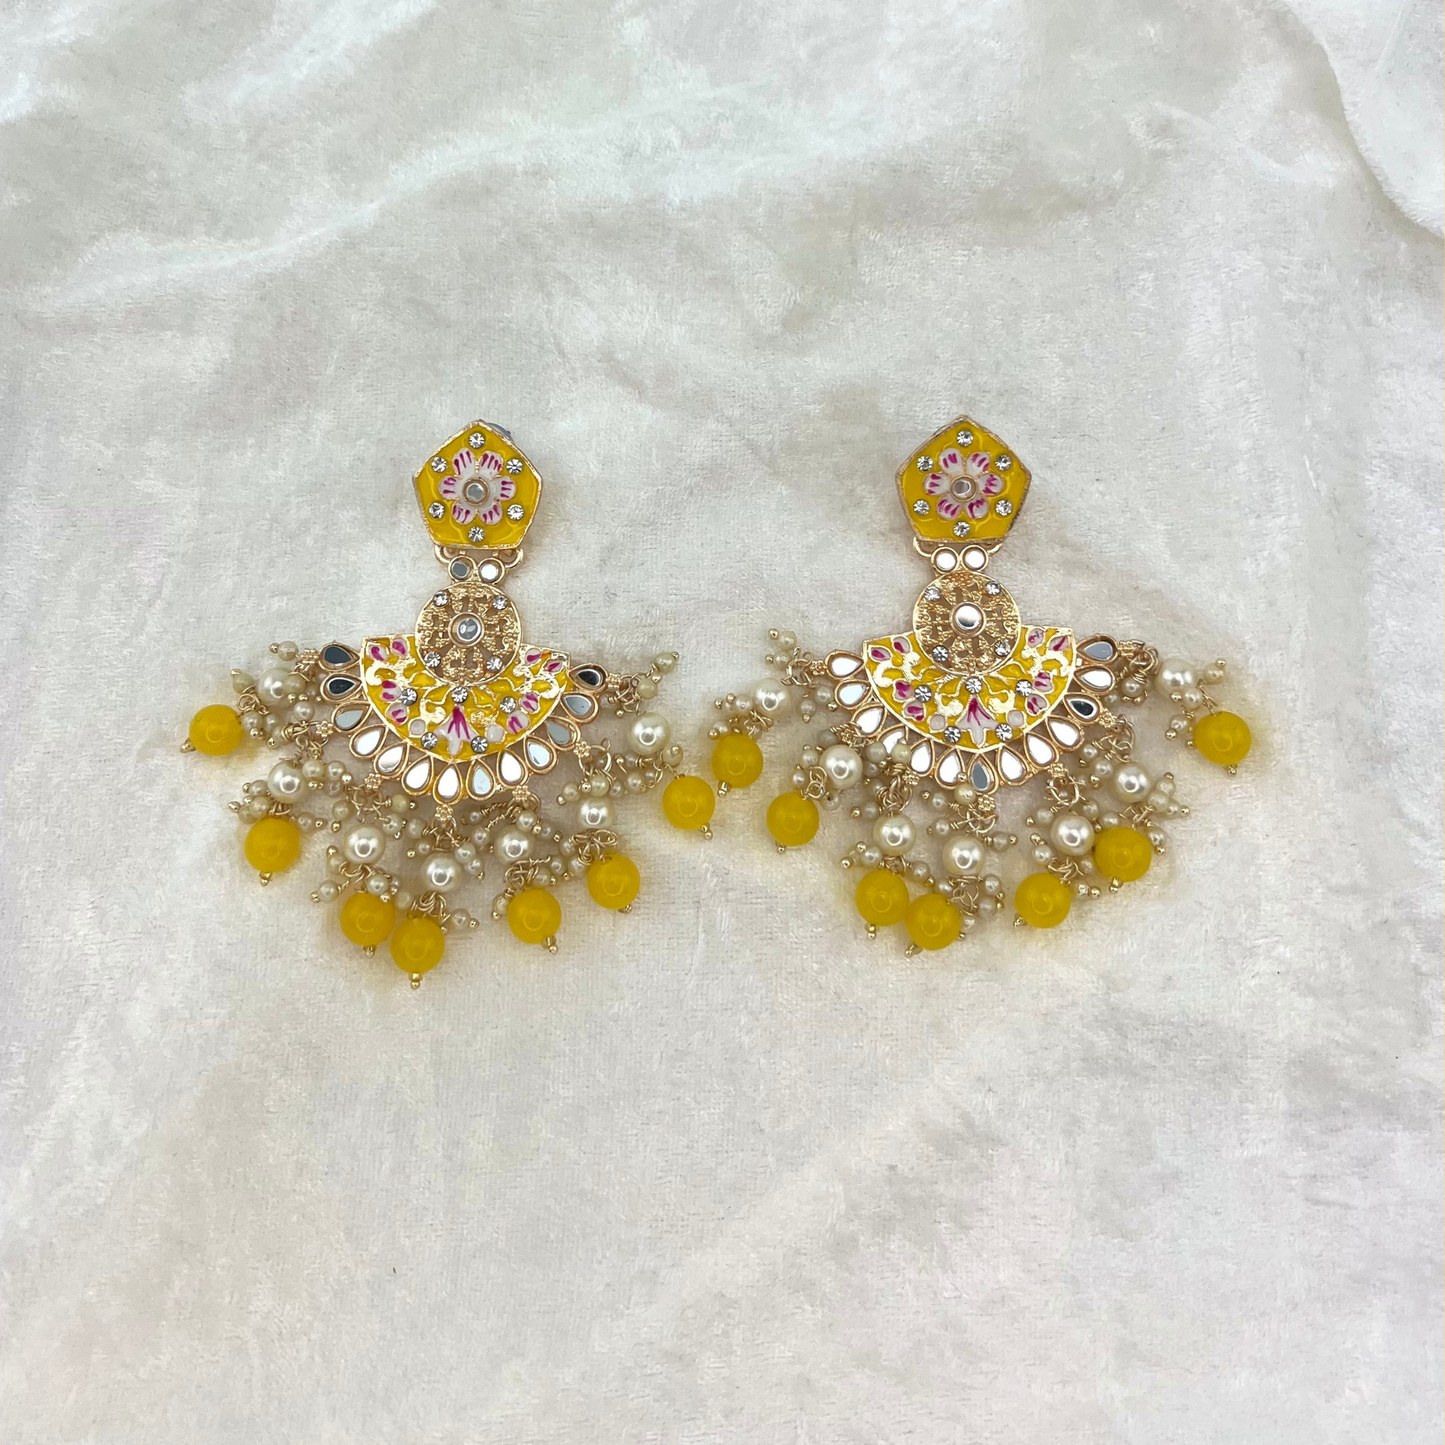 High quality hand painted earrings in Yellow with pearls, beads, mirrors and stone work. Latest 2022 indian jewellery for weddings, parties and special occasions.